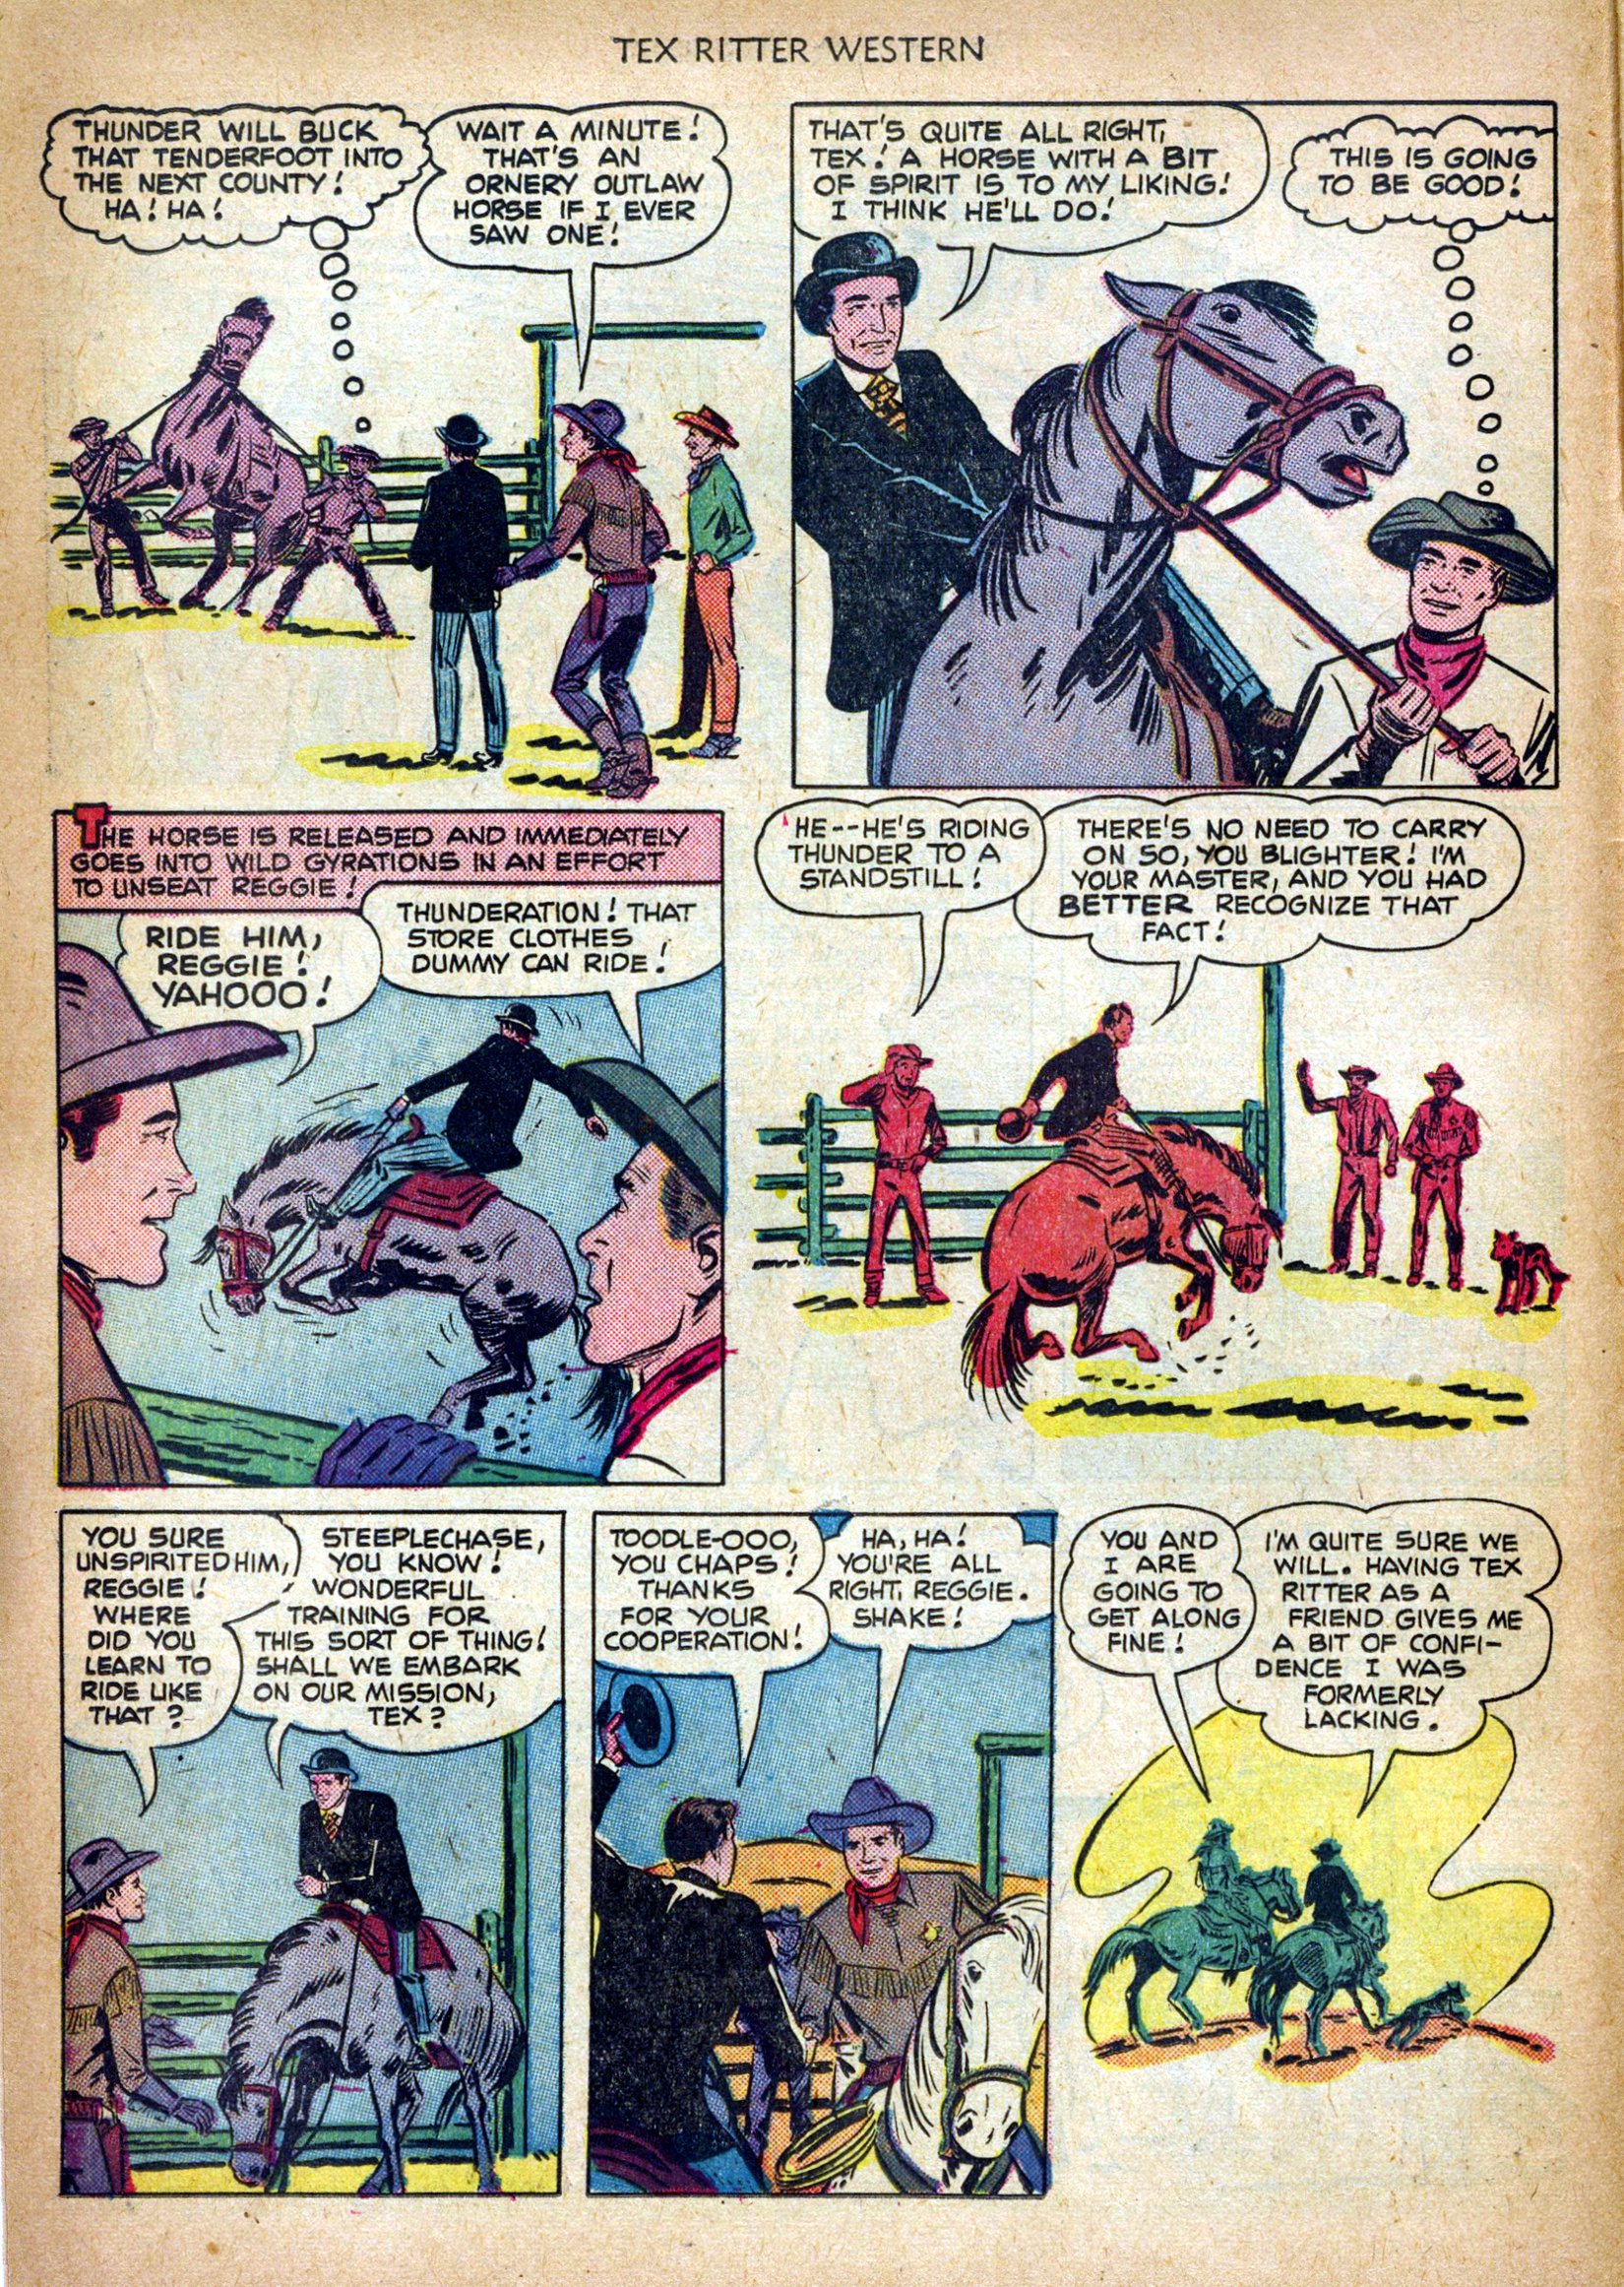 Read online Tex Ritter Western comic -  Issue #6 - 6